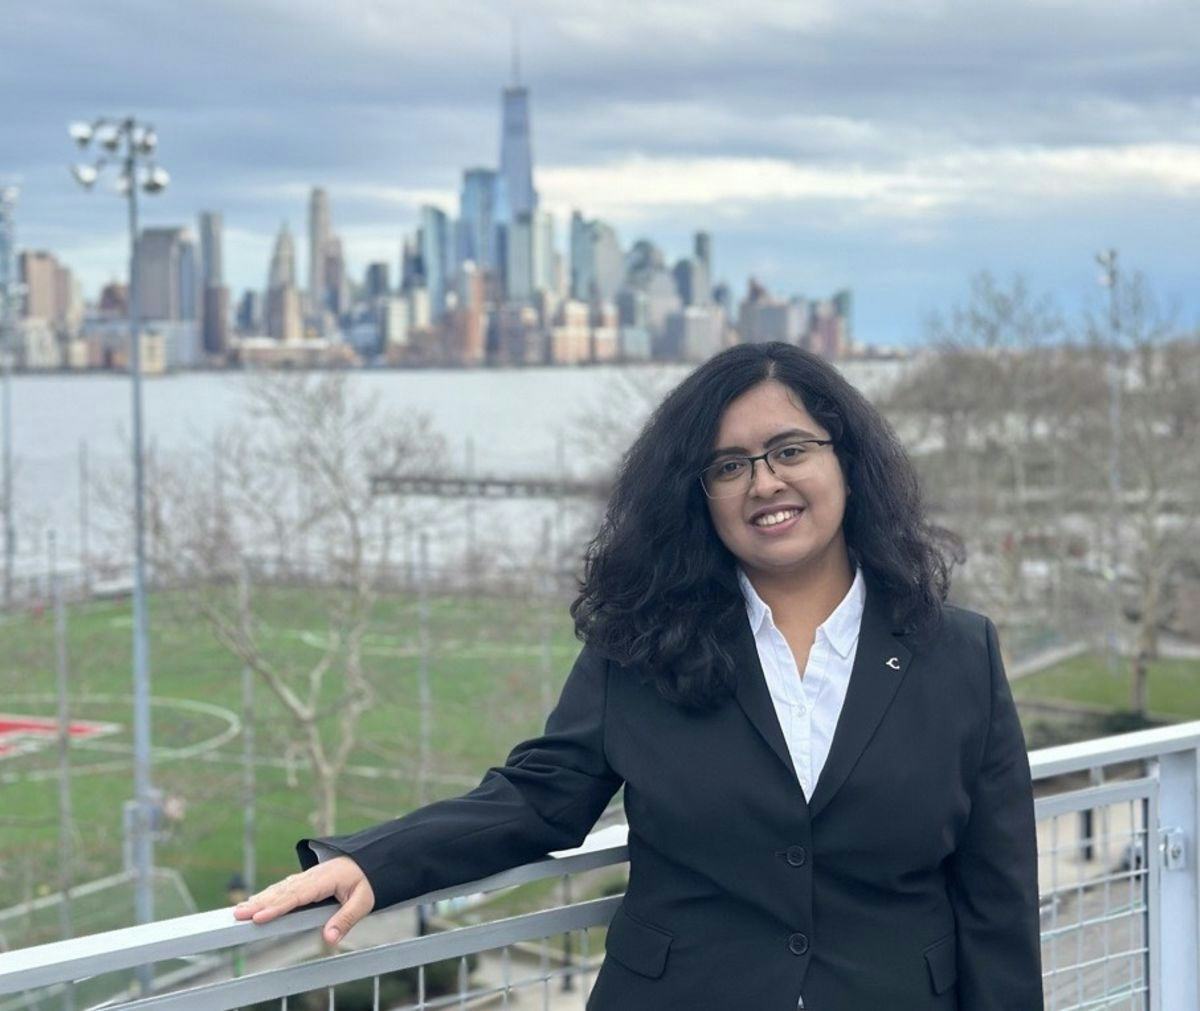 Rashi Wase posed in front of the New York City skyline.